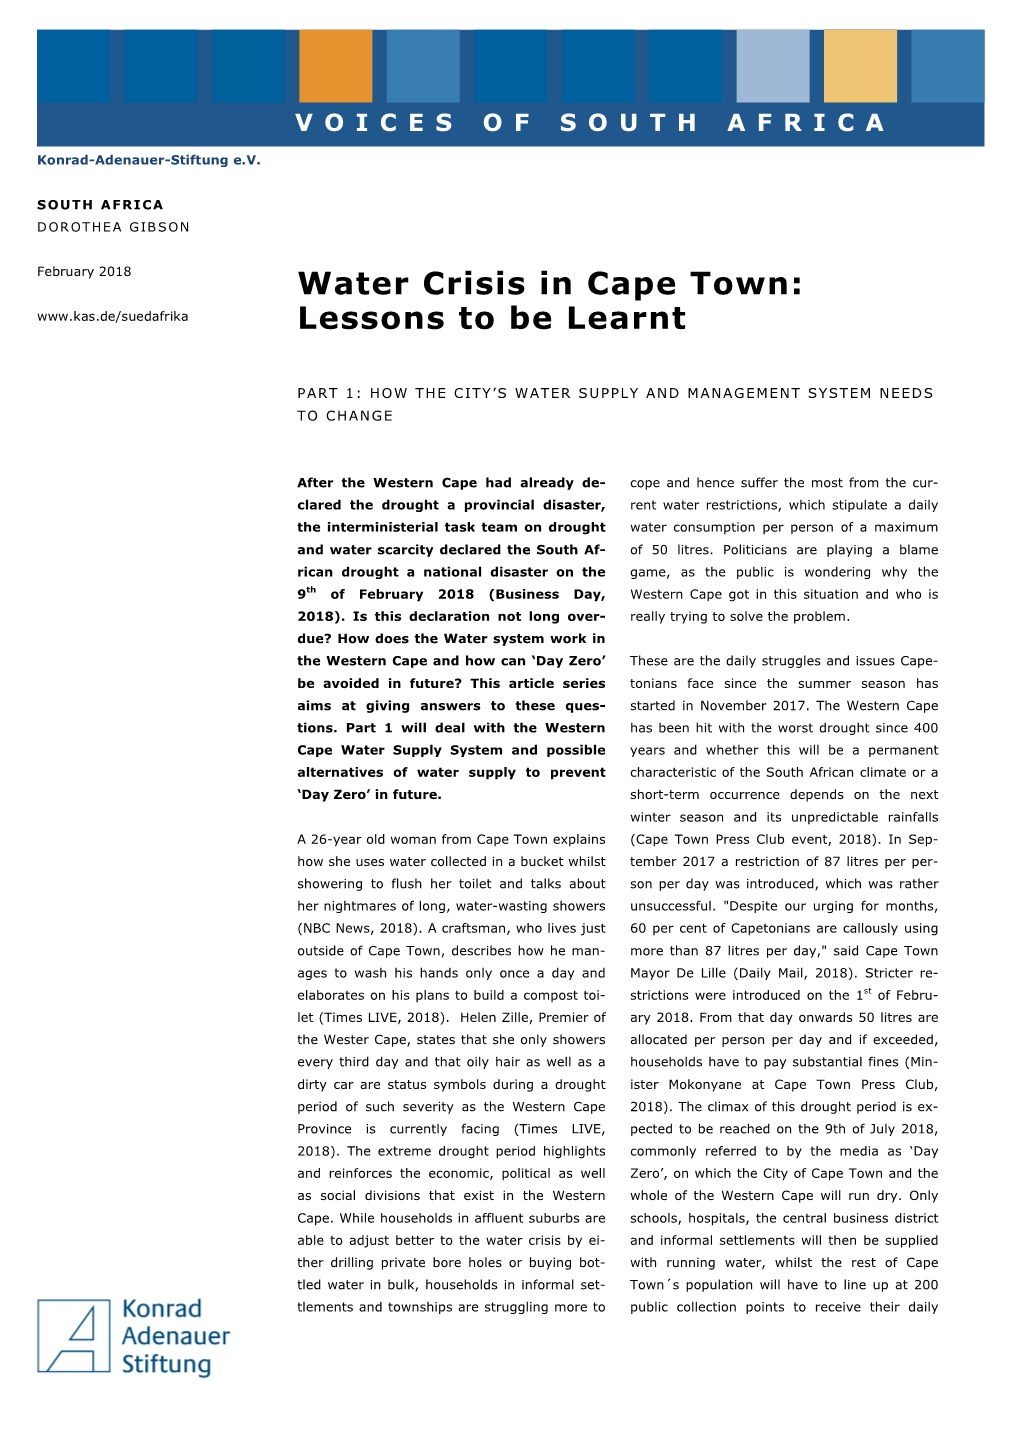 Water Crisis in Cape Town: Lessons to Be Learnt